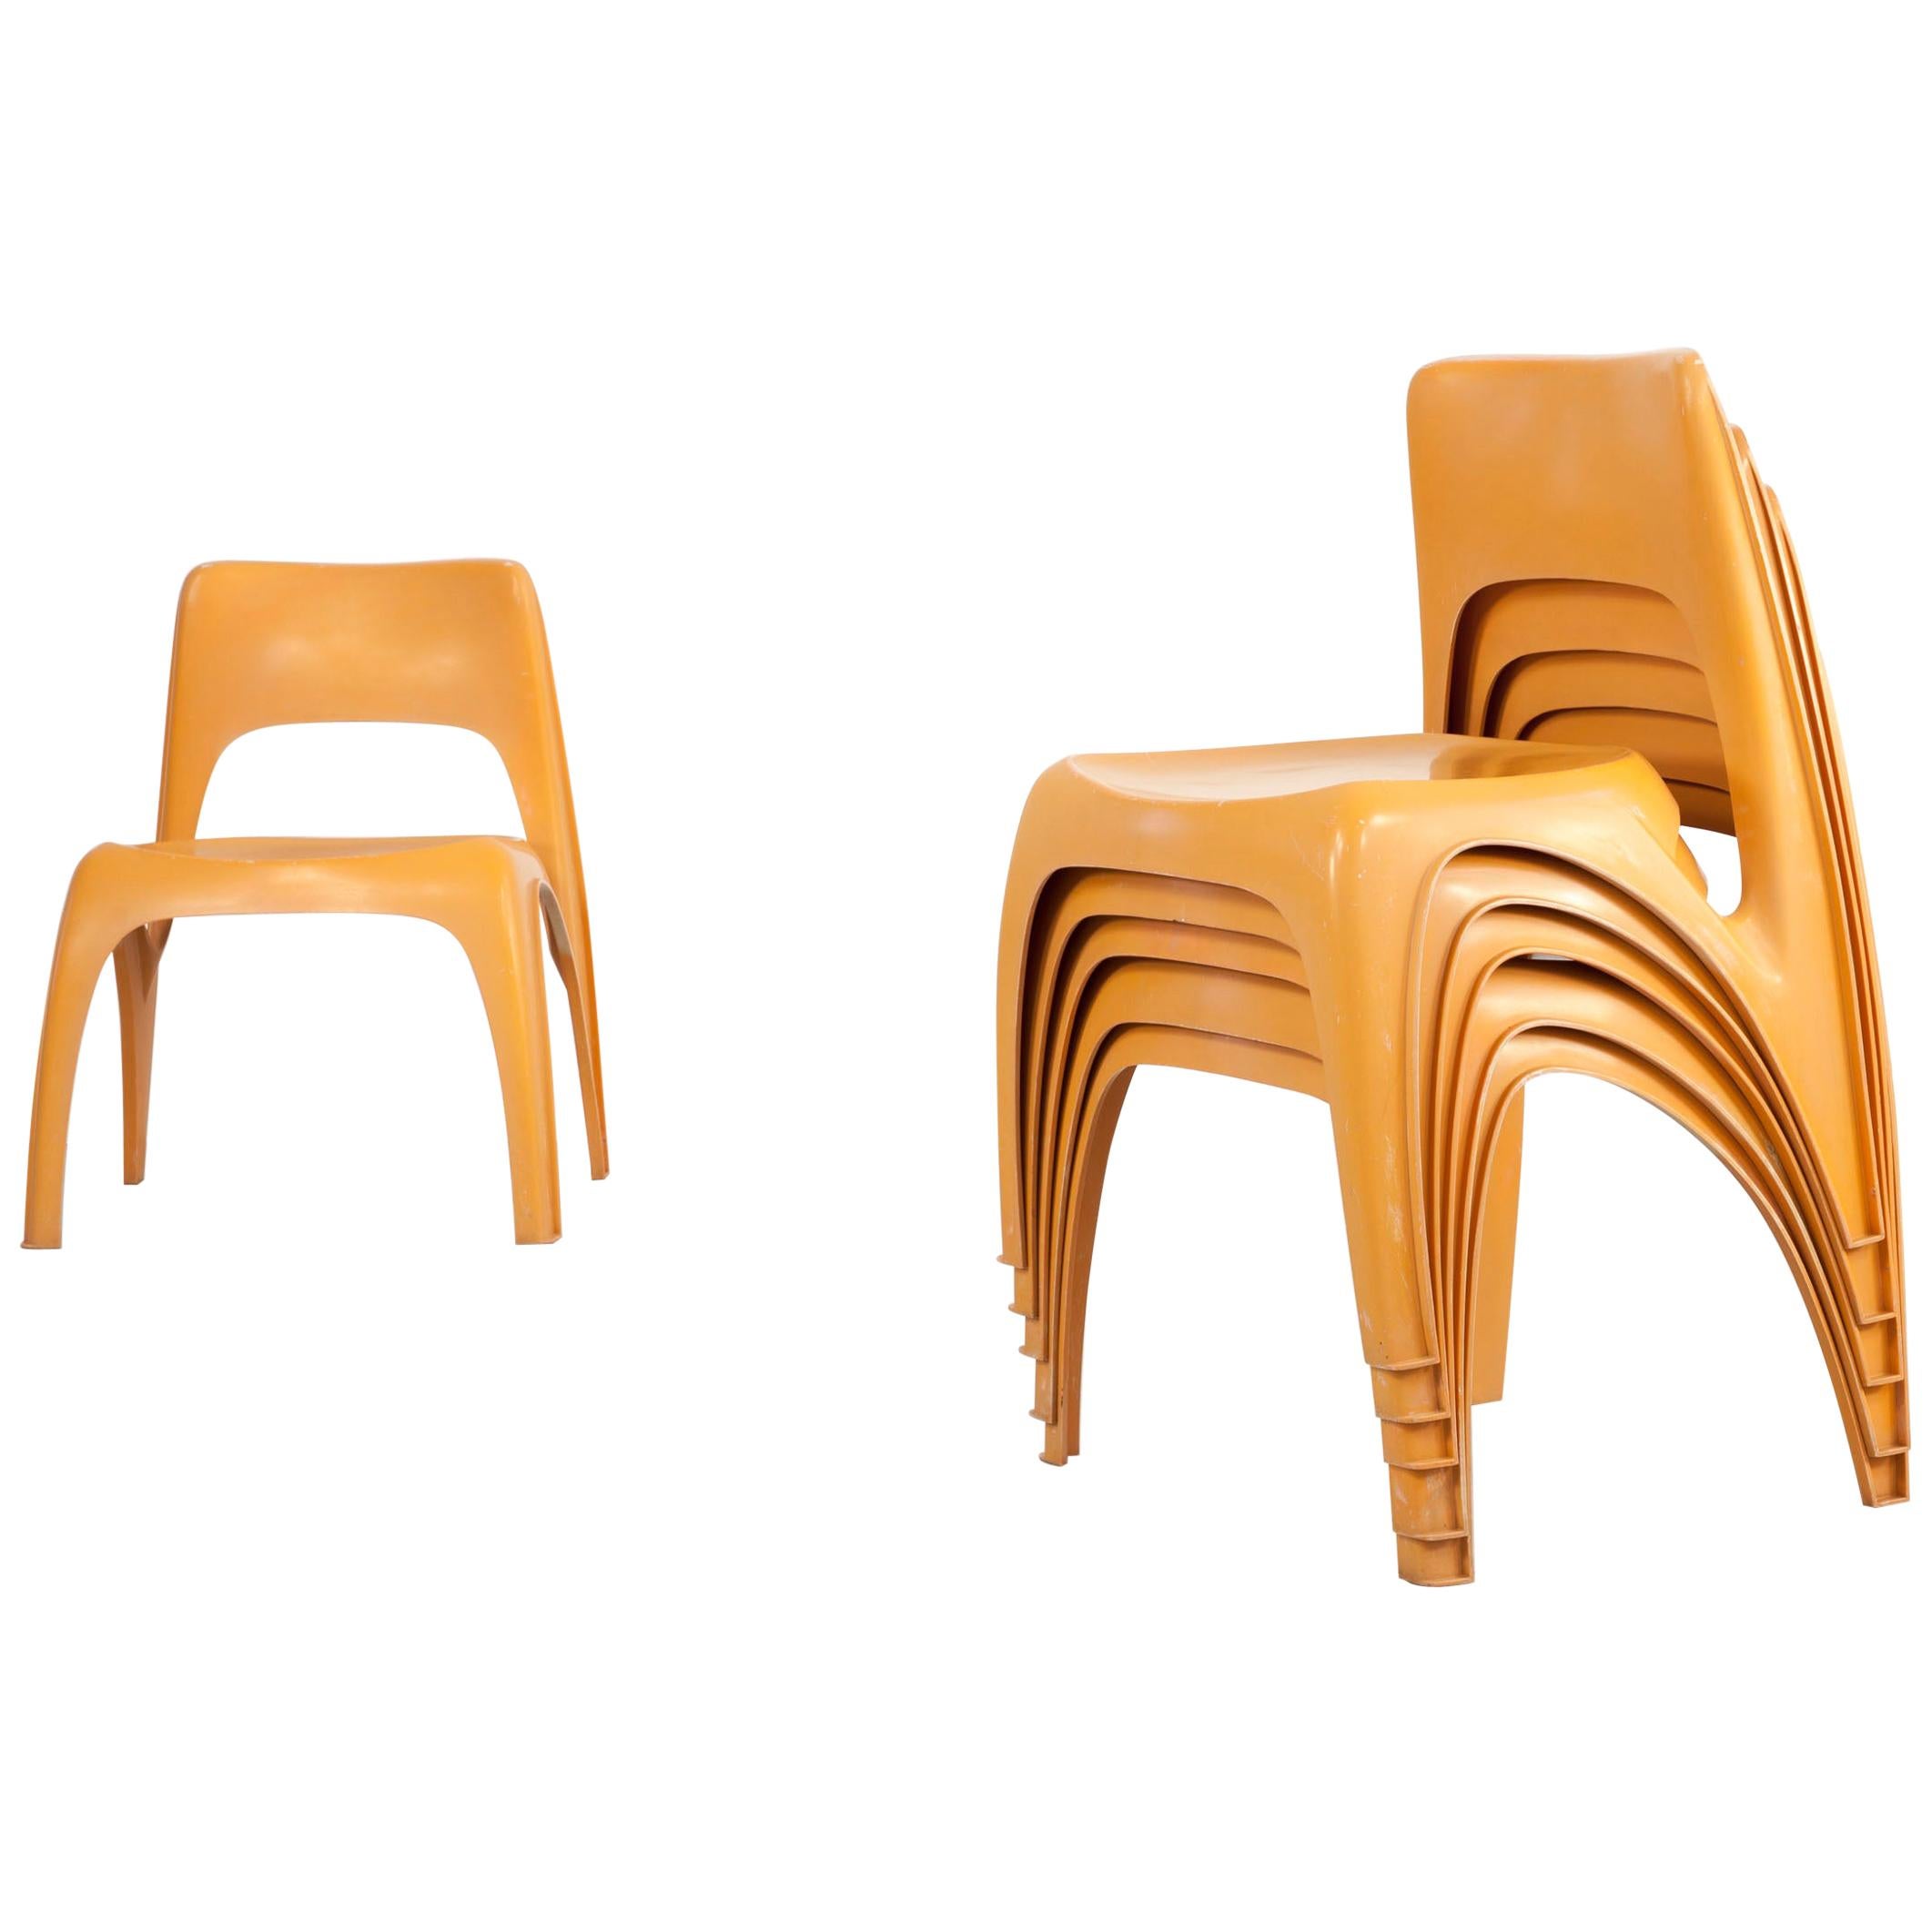 Set of 6 Stackable Chairs, Design by Preben Fabricius, by Interplast, Germany